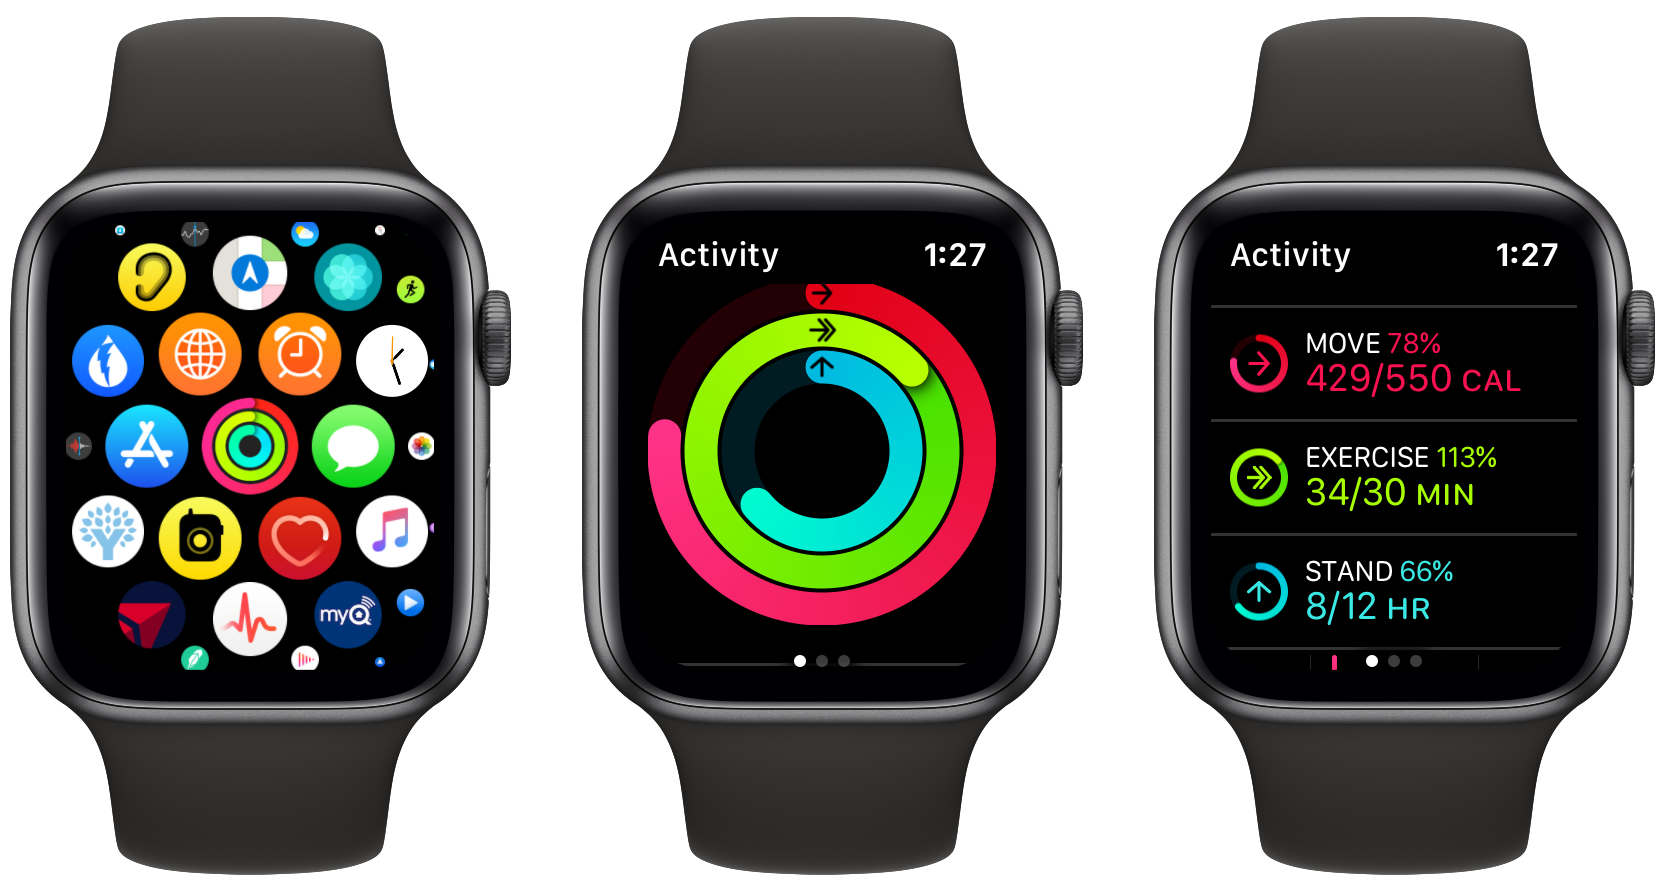 How to see Apple Watch calories burned, active and passive walkthrough